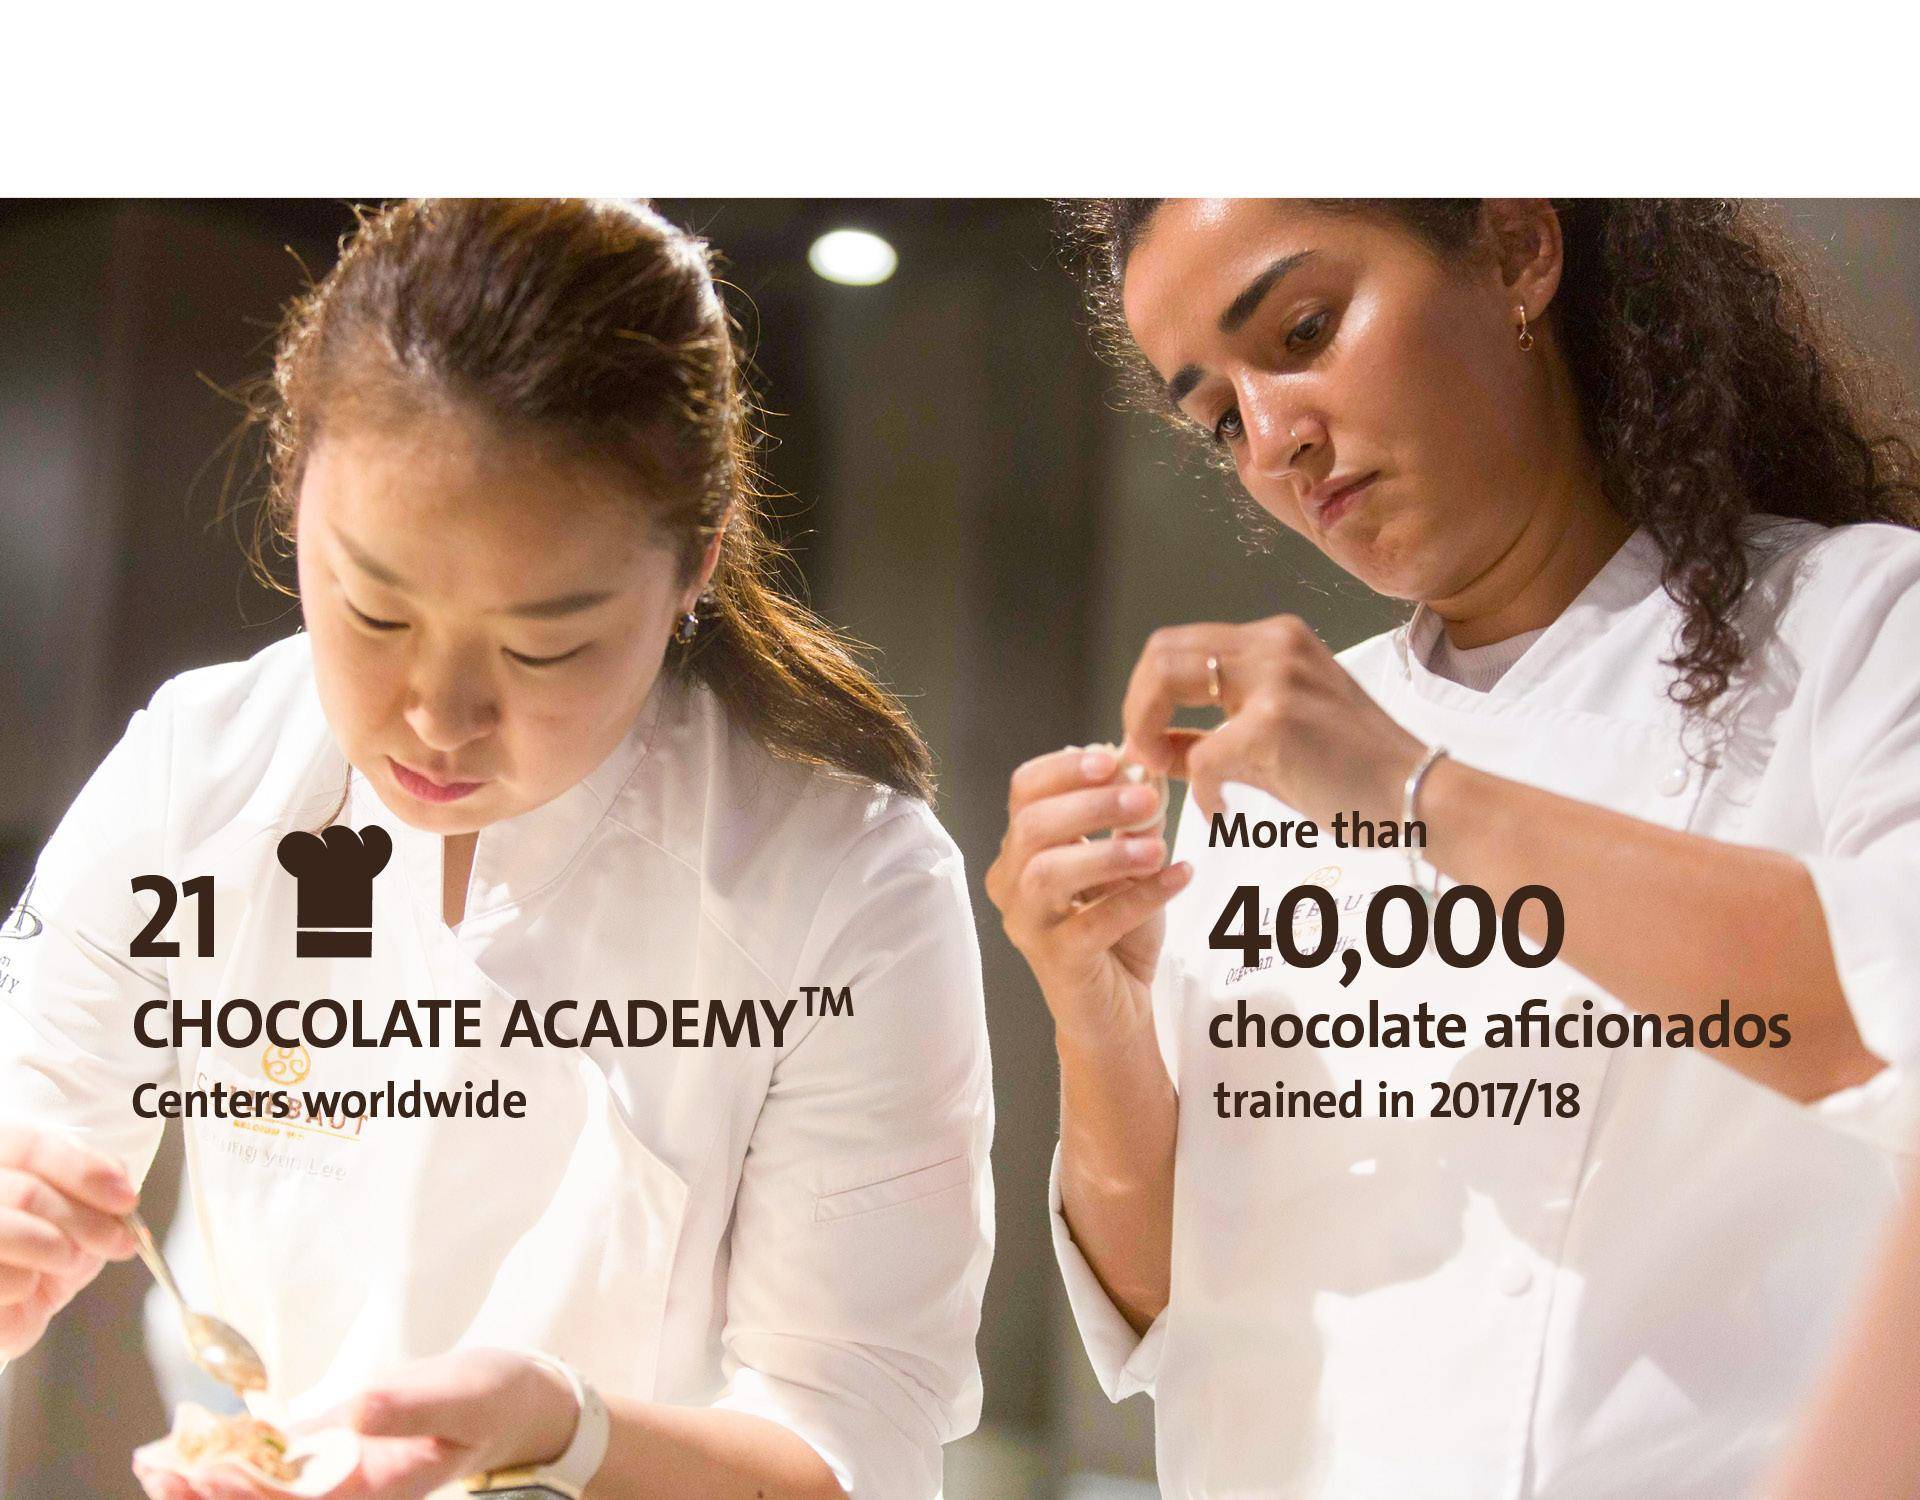 Image Slider Chocolate Academy Fiscal Year 2017/18 Barry Callebaut Group